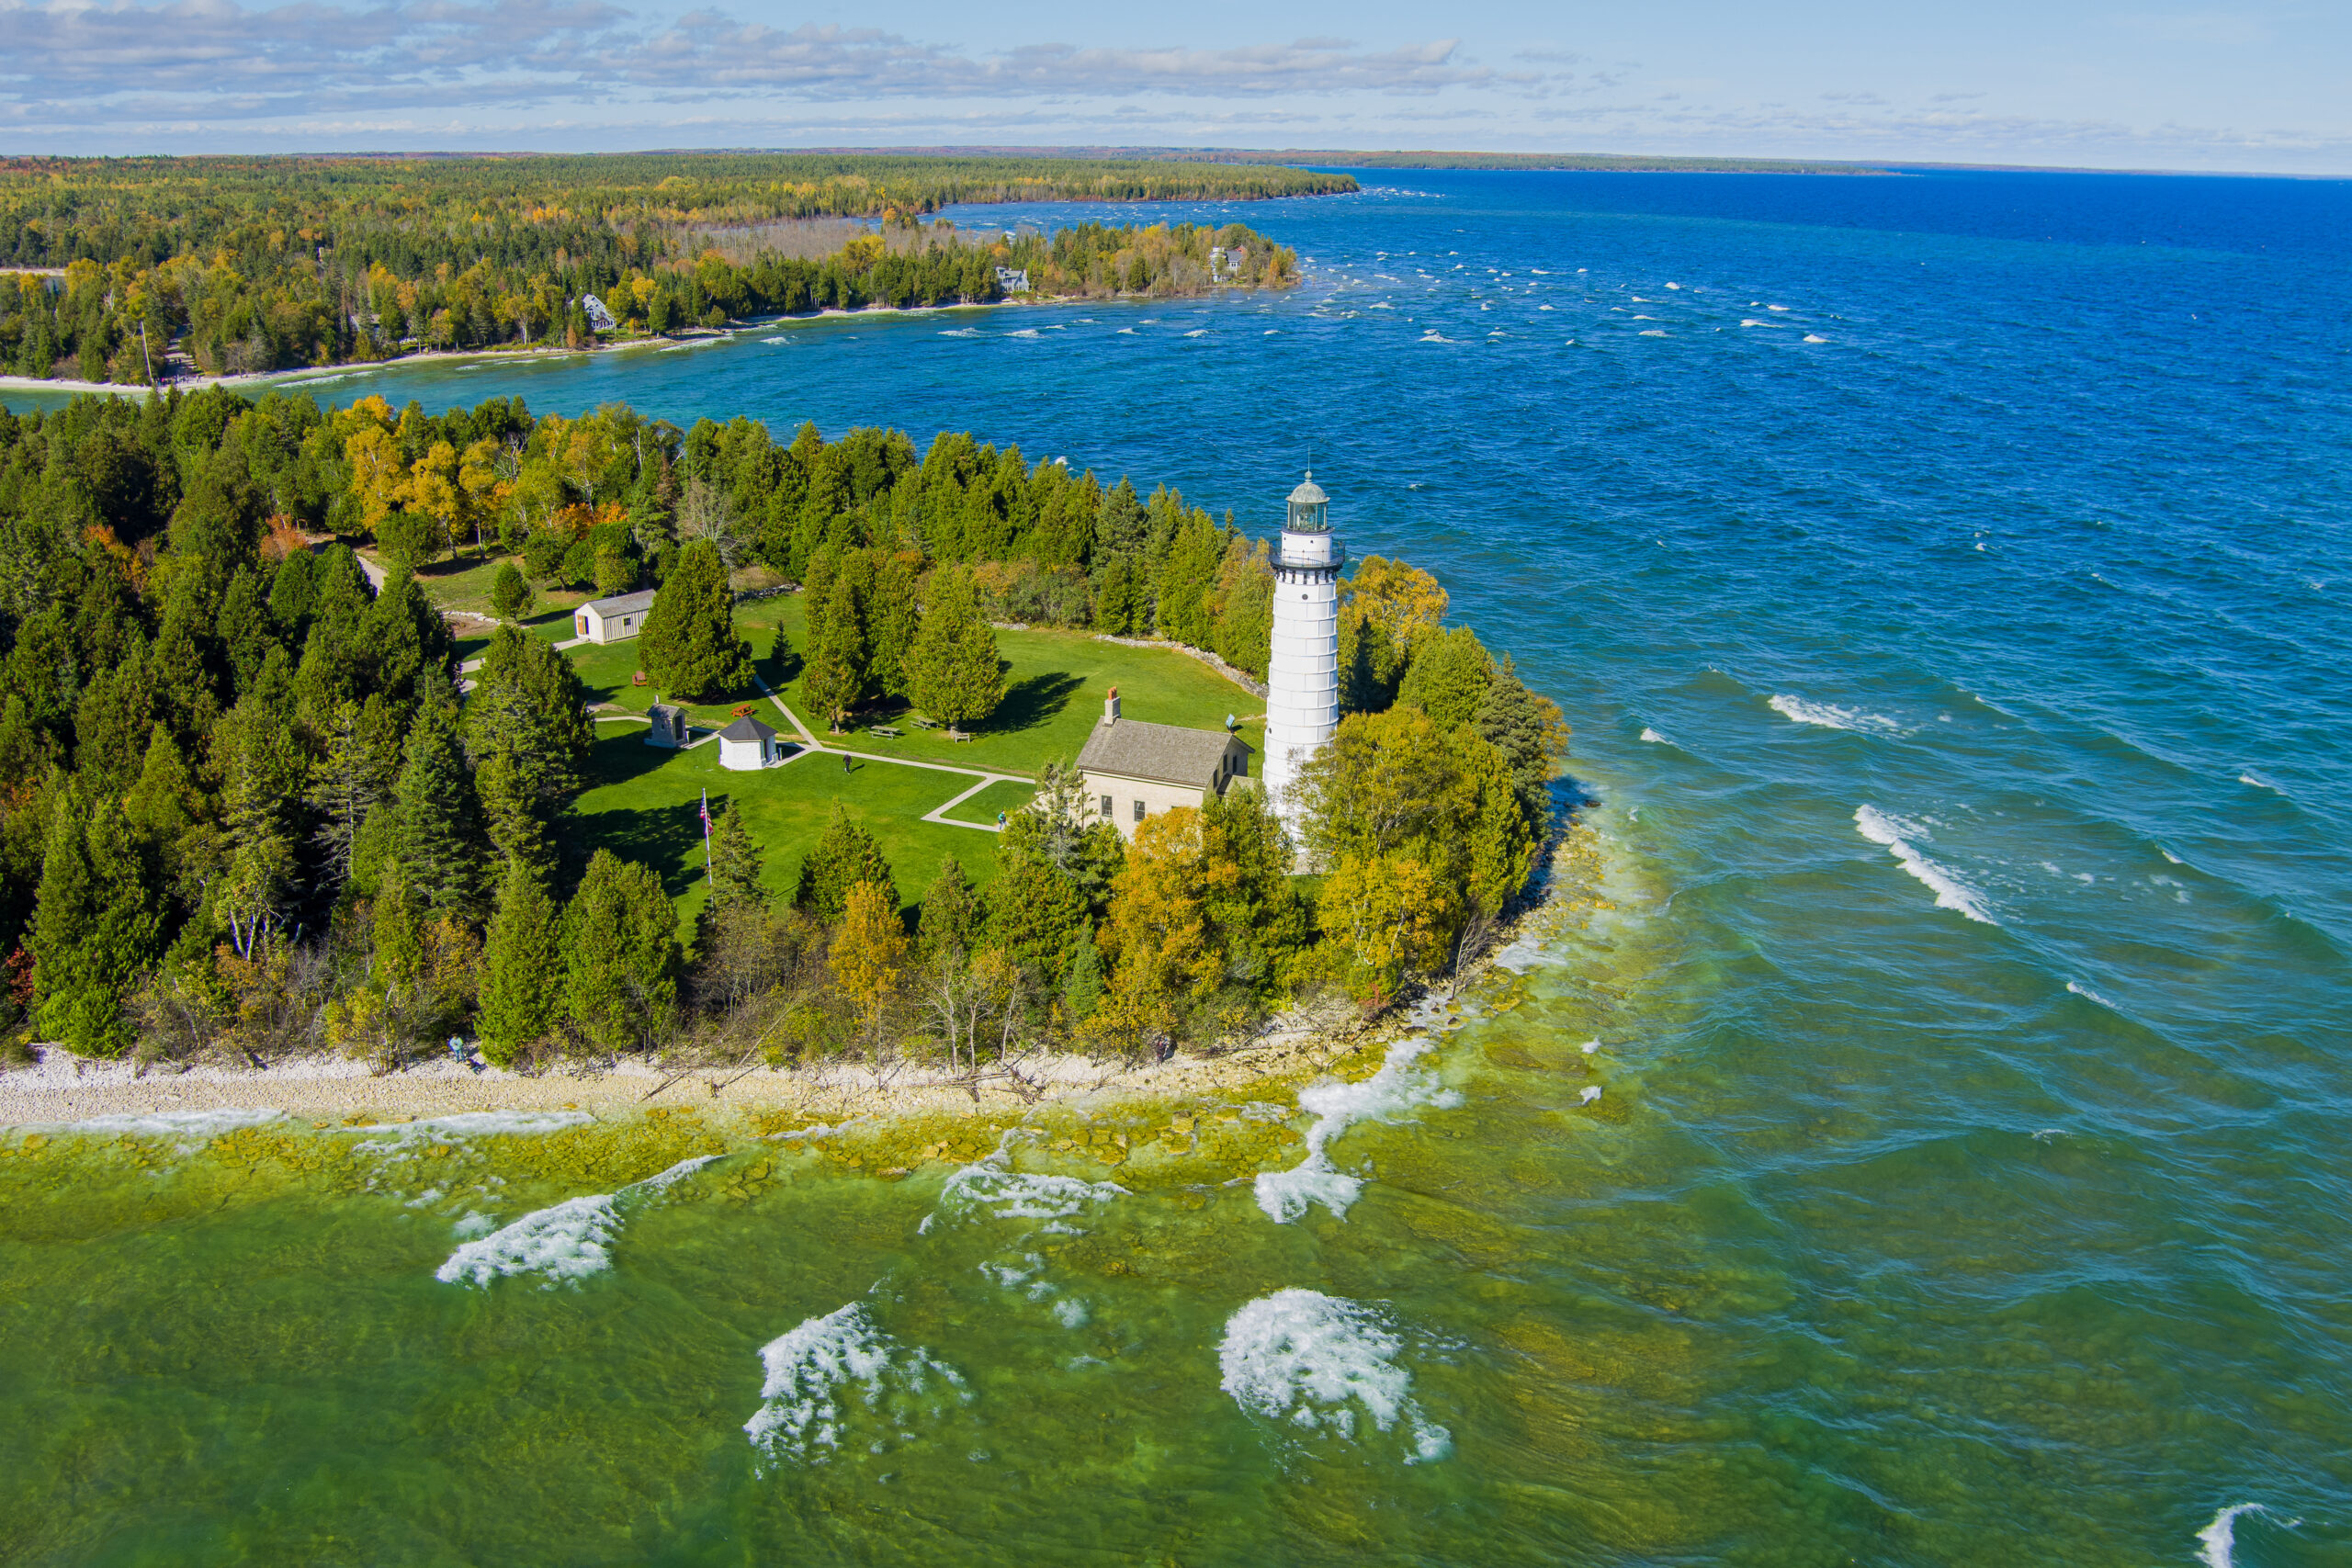 The famous Cana Island lighthouse located next to lake Michigan in Door County Wisconsin.